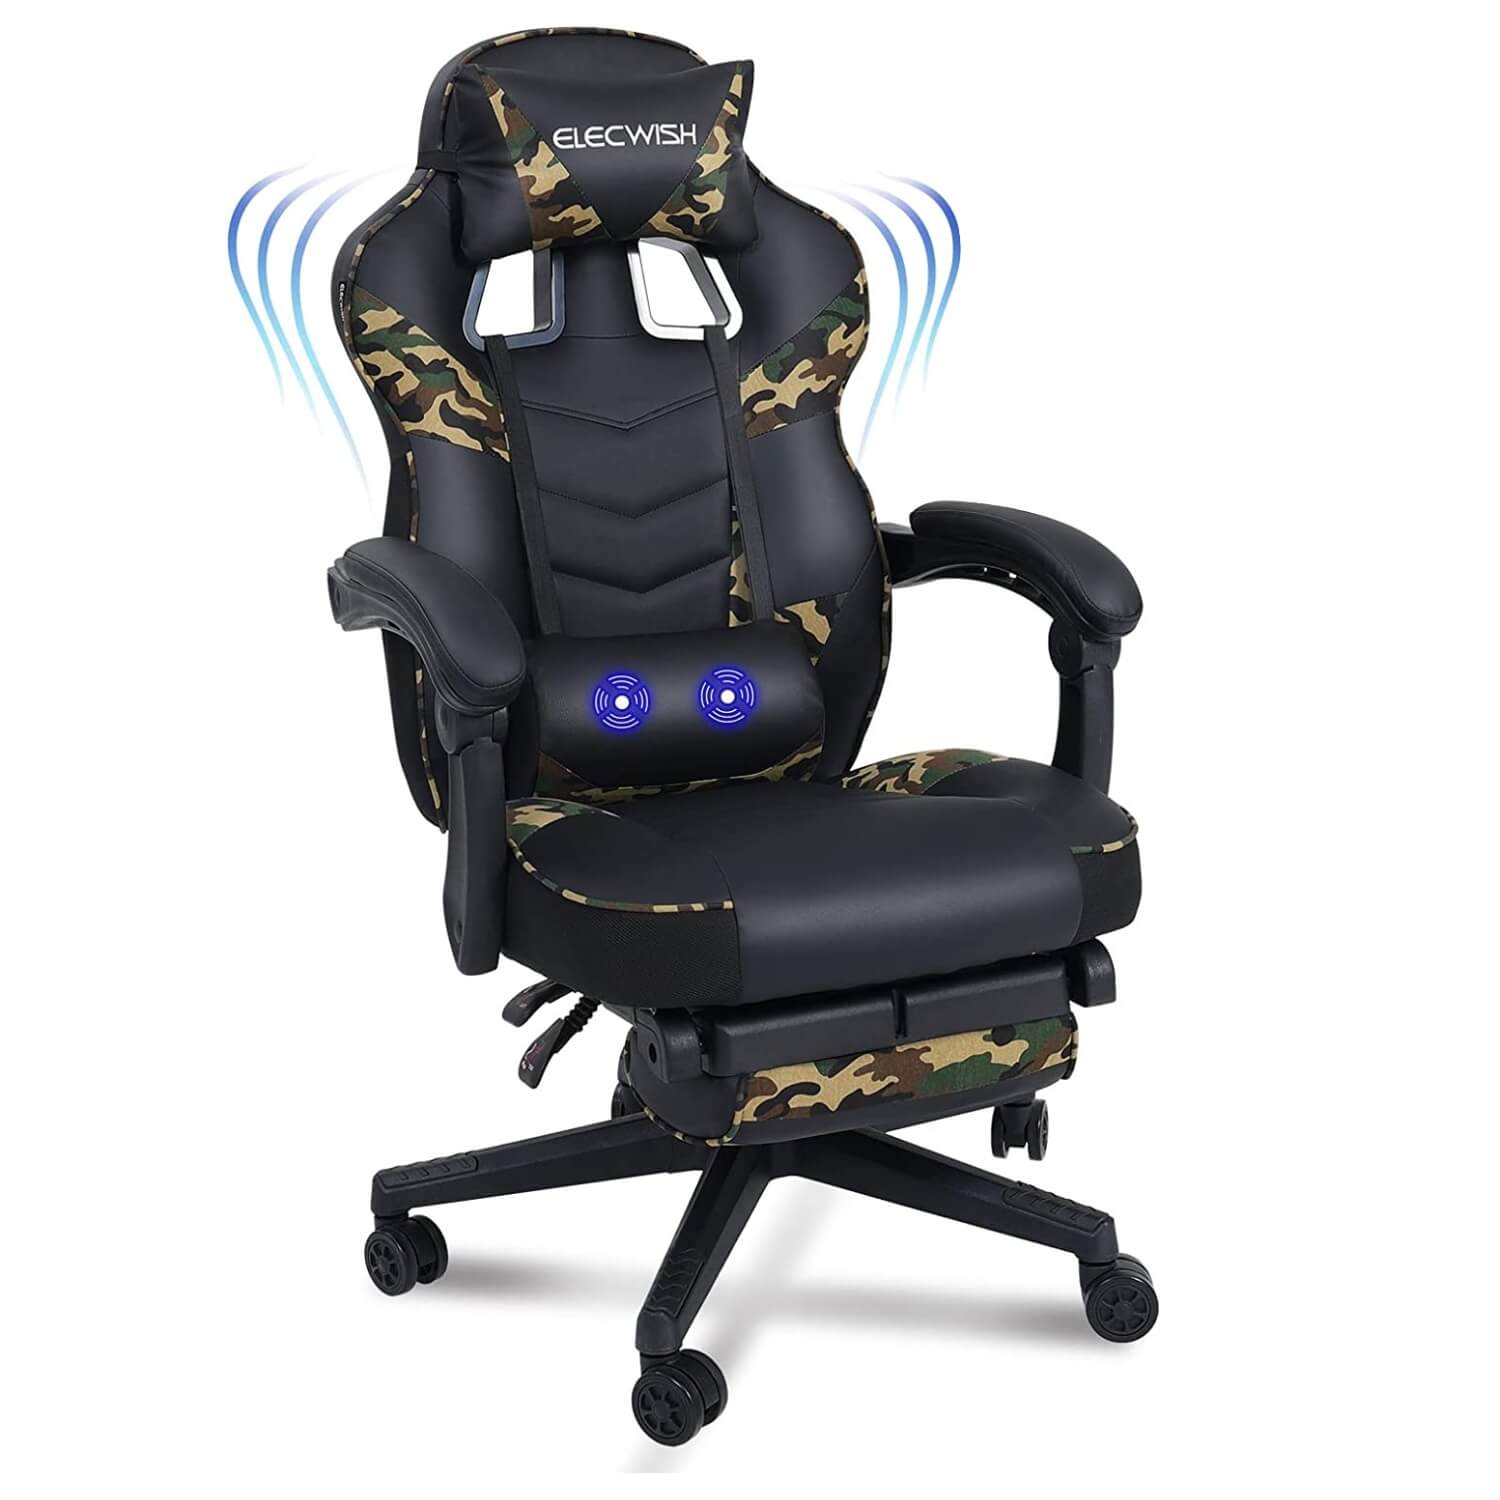 Elecwish massage gaming chair with footrest OC112 camouflage